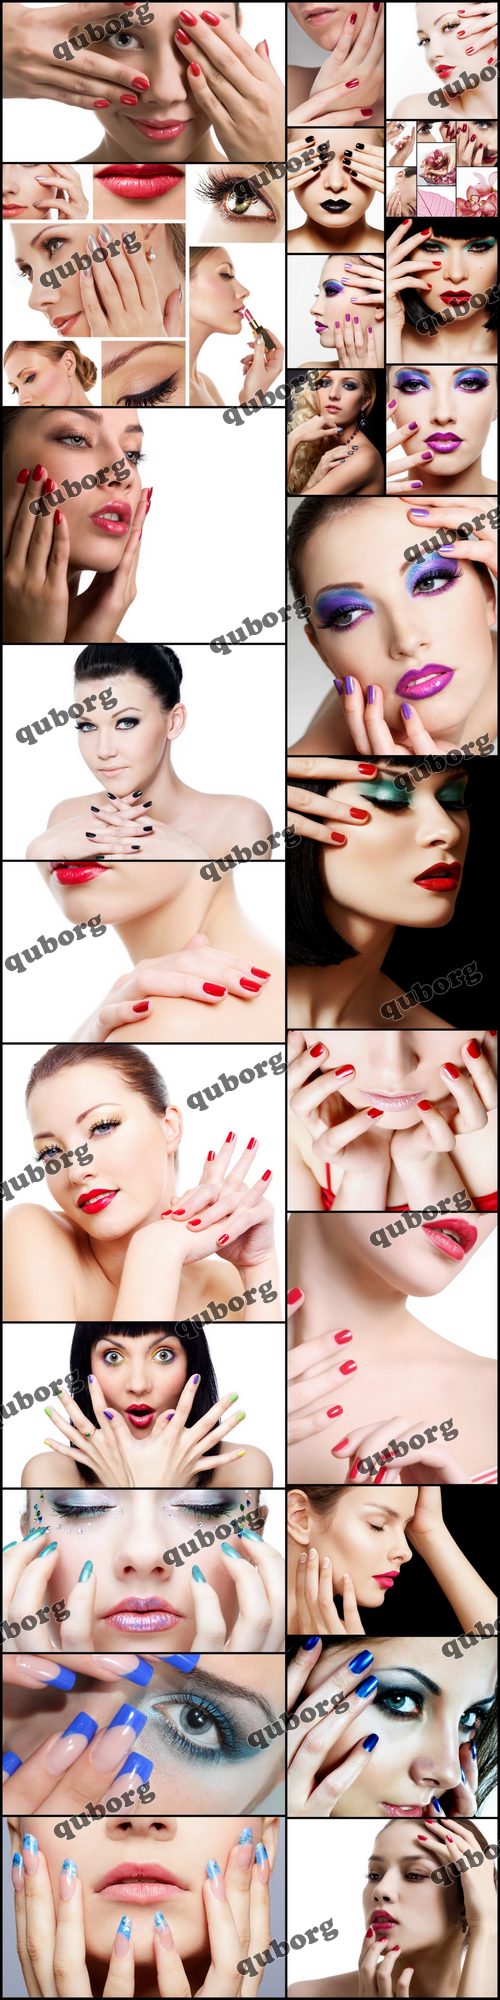 Stock Photos - Fashion Makeup and Manicure